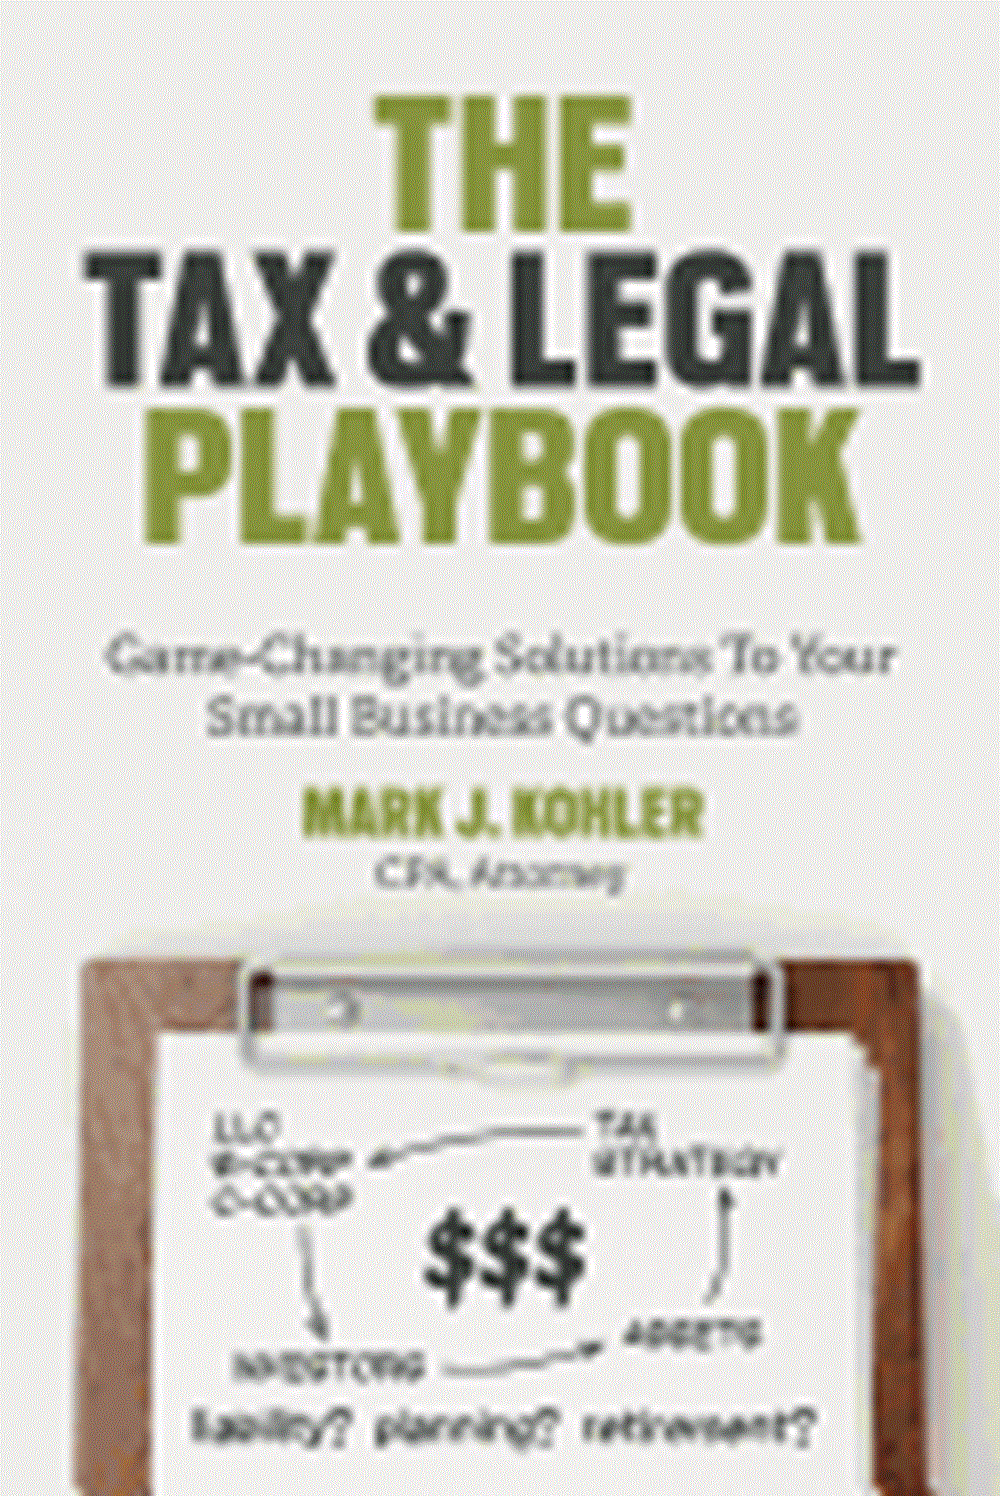 Tax and Legal Playbook Game-Changing Solutions to Your Small-Business Questions